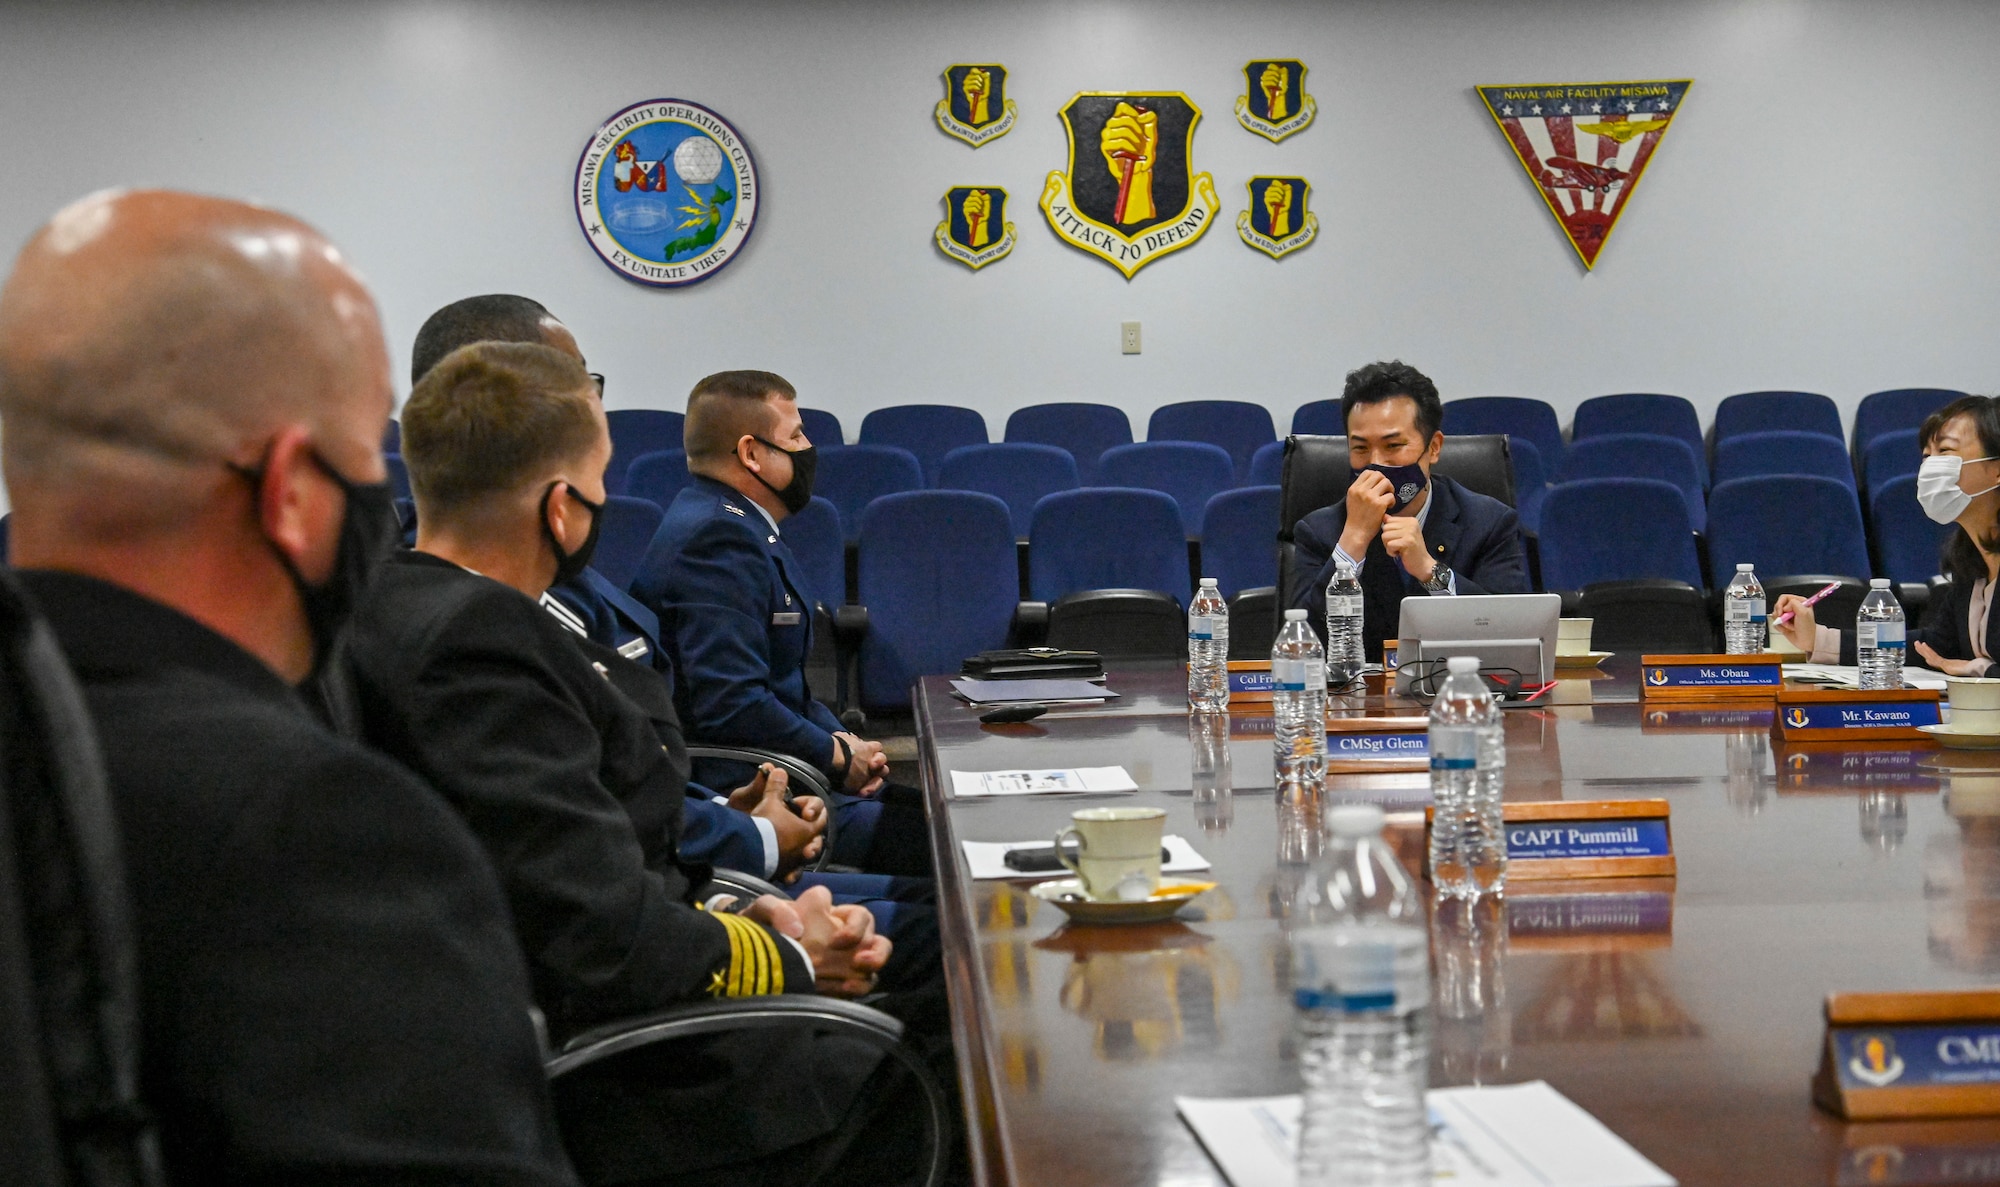 Takashi Uto, center, Japan State Minister of Foreign Affairs, receives a mission briefing with U.S. military leaders during his visit to Misawa Air Base, Japan, April 12, 2021. During the briefing, Uto and base leaders discussed the base's mission and relationship within the local community, Japan, and Indo-Pacific Command. (U.S. Air Force photo by Tech. Sgt. Timothy Moore)